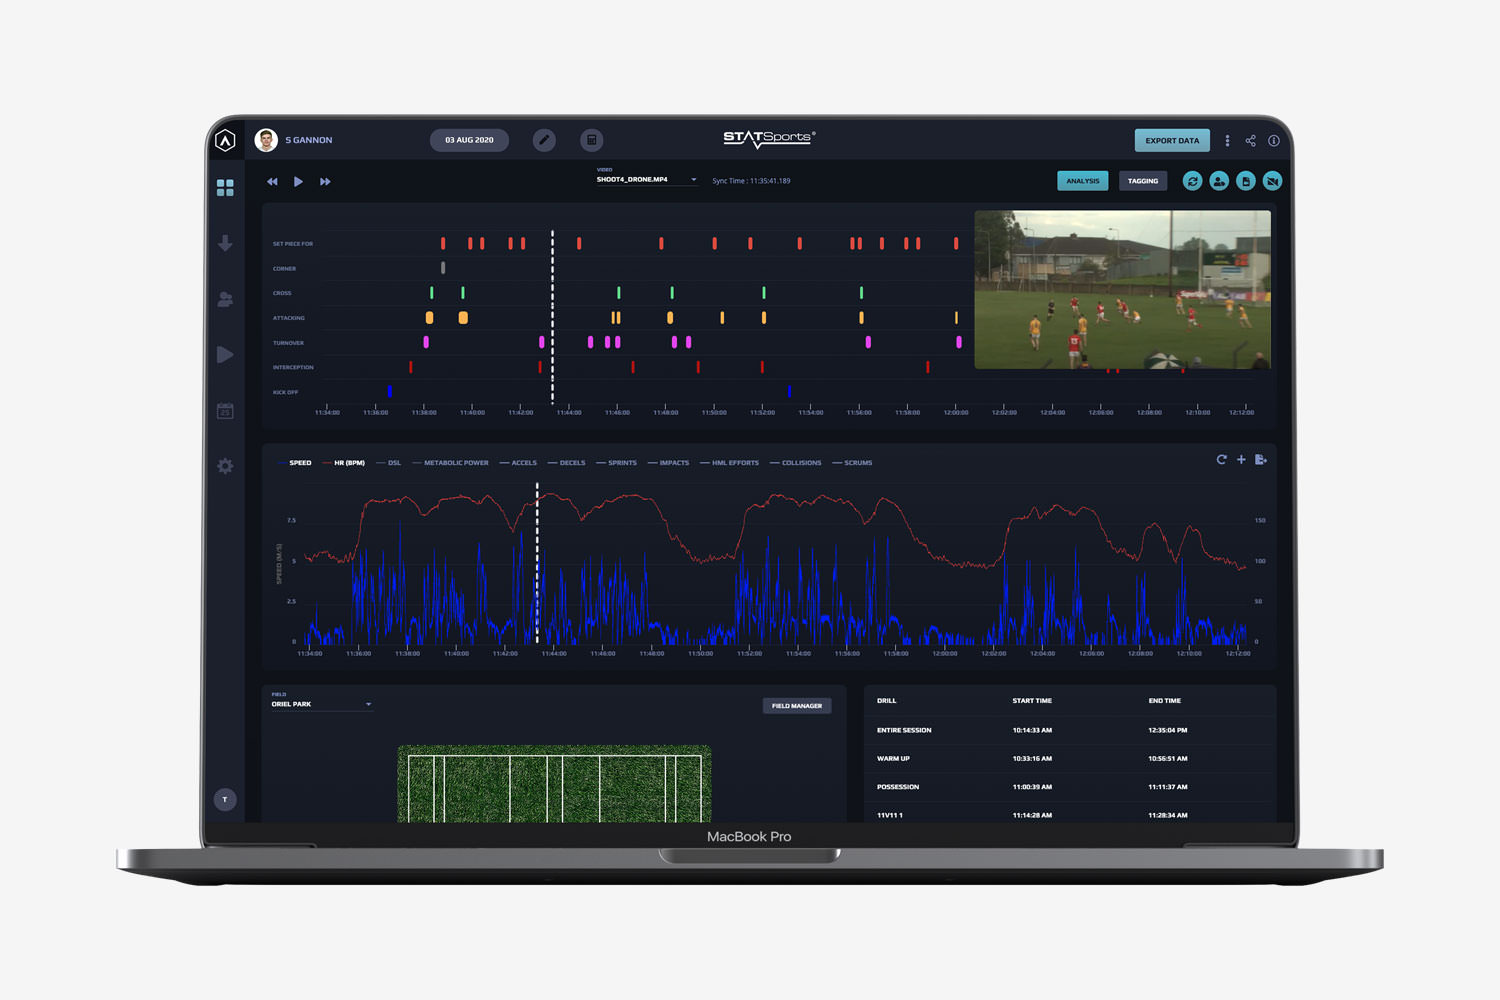 GAA Video Manager